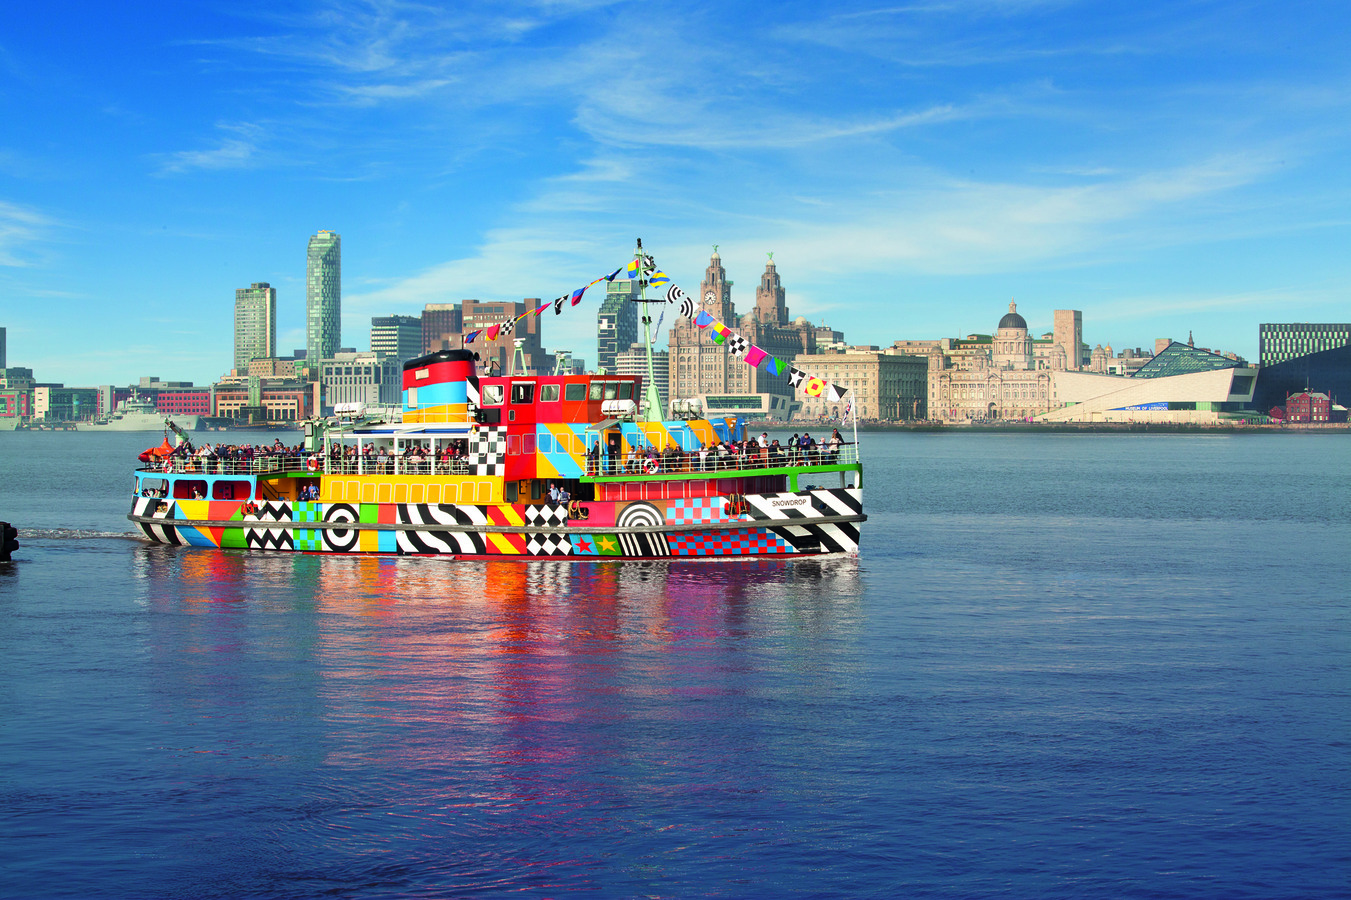 Dazzle Ferry on River Mersey Liverpool